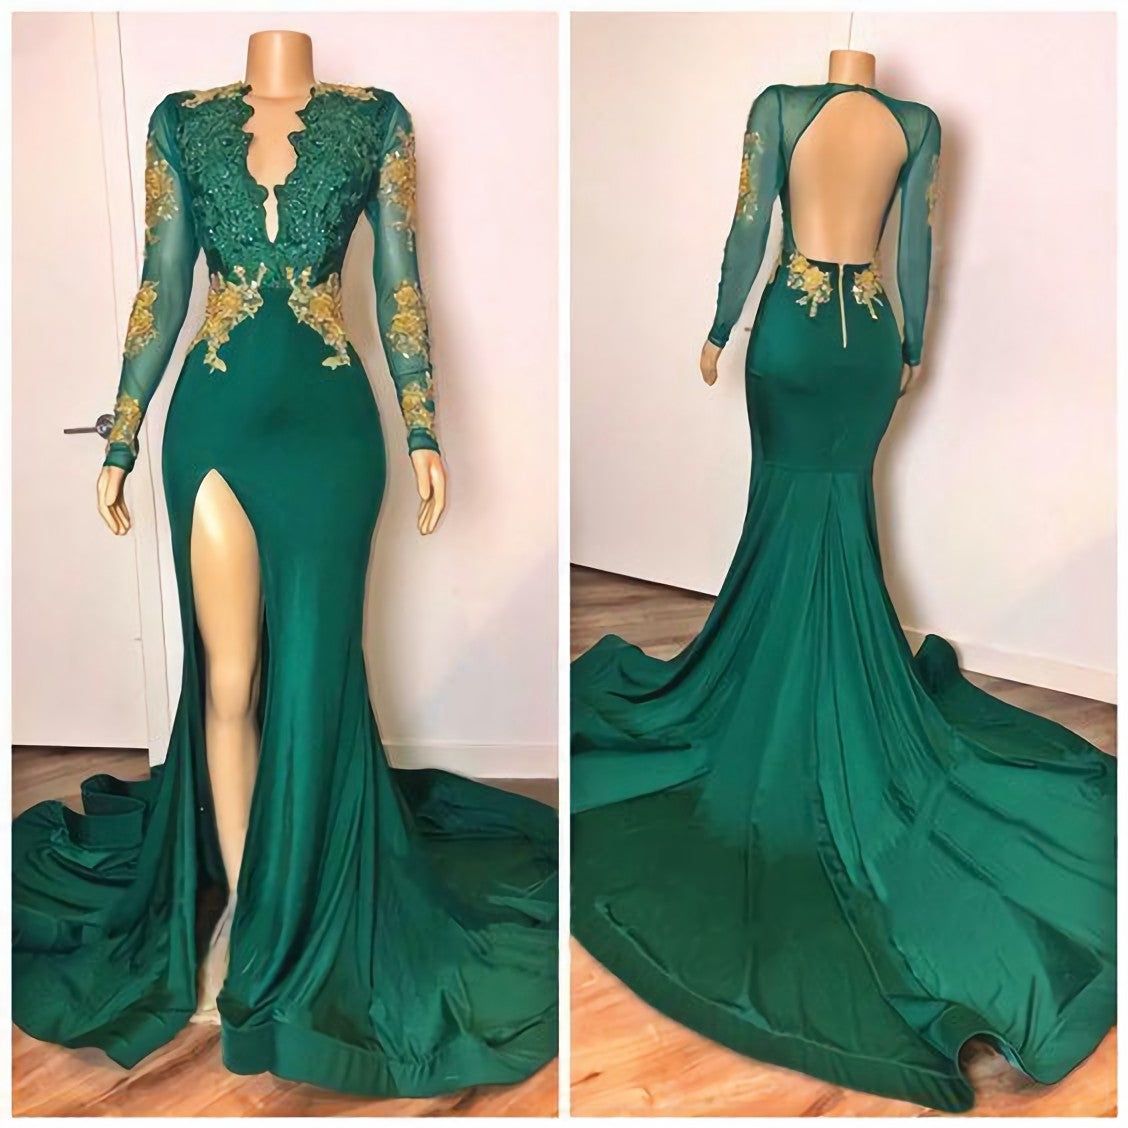 Green Long Sleeves V Neck Lace Mermaid Corset Prom Dress outfits, Evening Dresses For Over 56